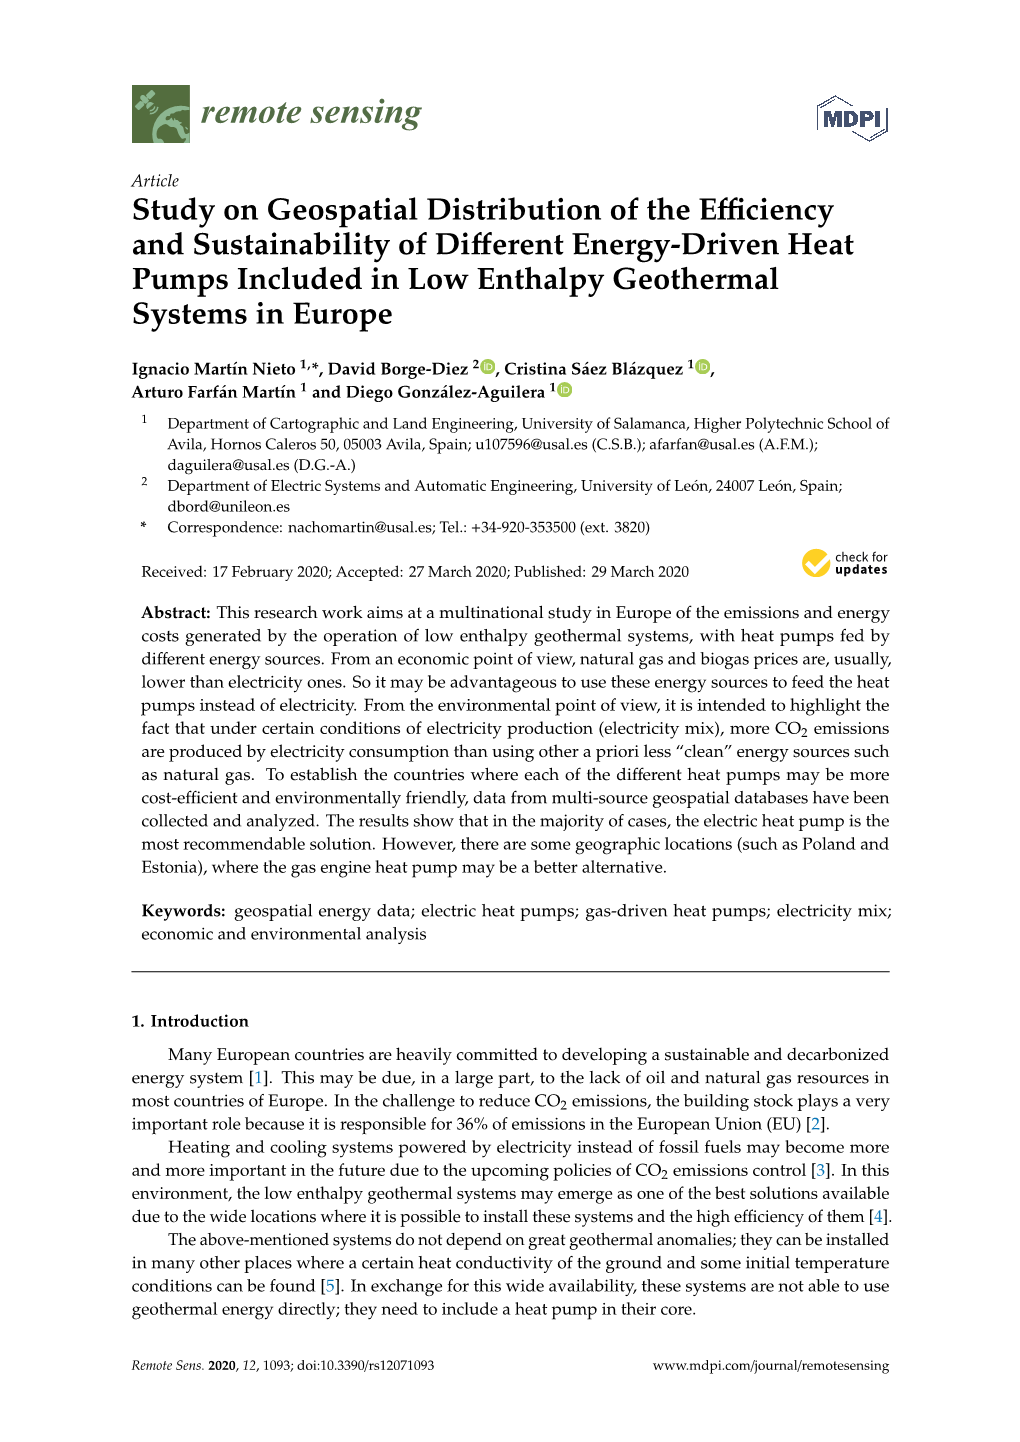 Study on Geospatial Distribution of the Efficiency and Sustainability of Different Energy-Driven Heat Pumps Included in Low Enth